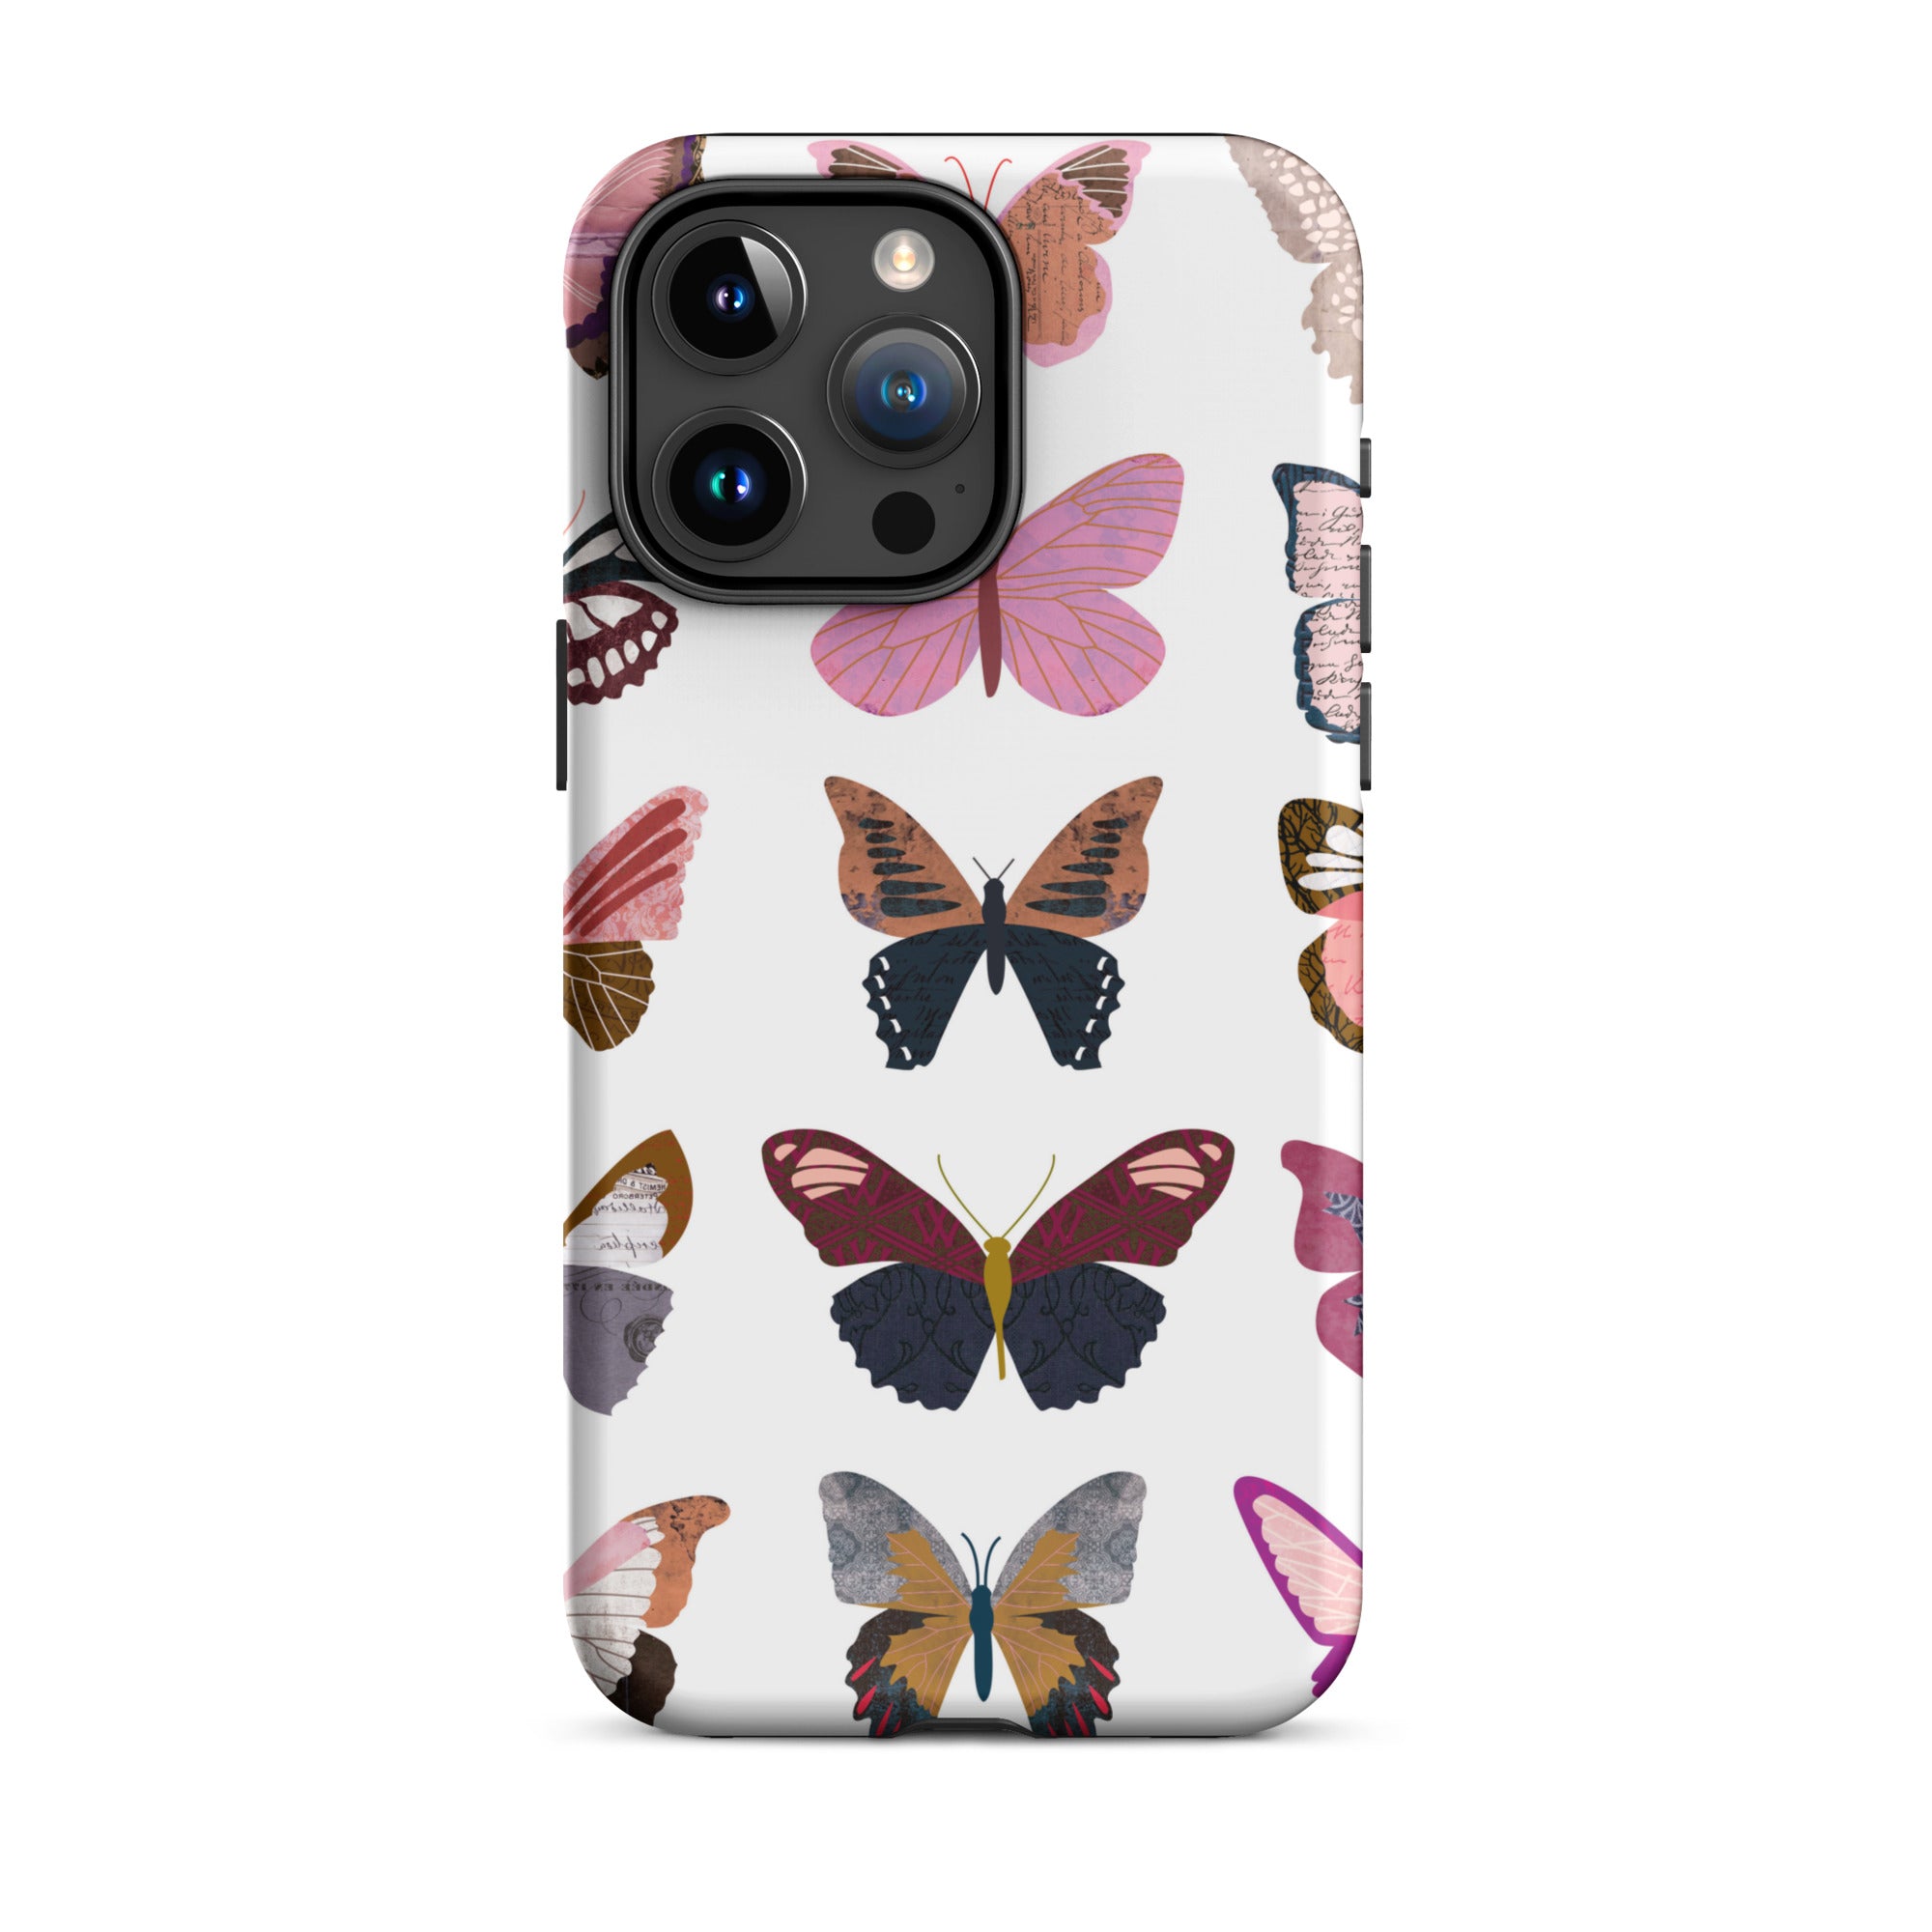 pink butterflies illustration pattern cute nature iphone 15 case cover protector mobile accessories lindsey kay collective